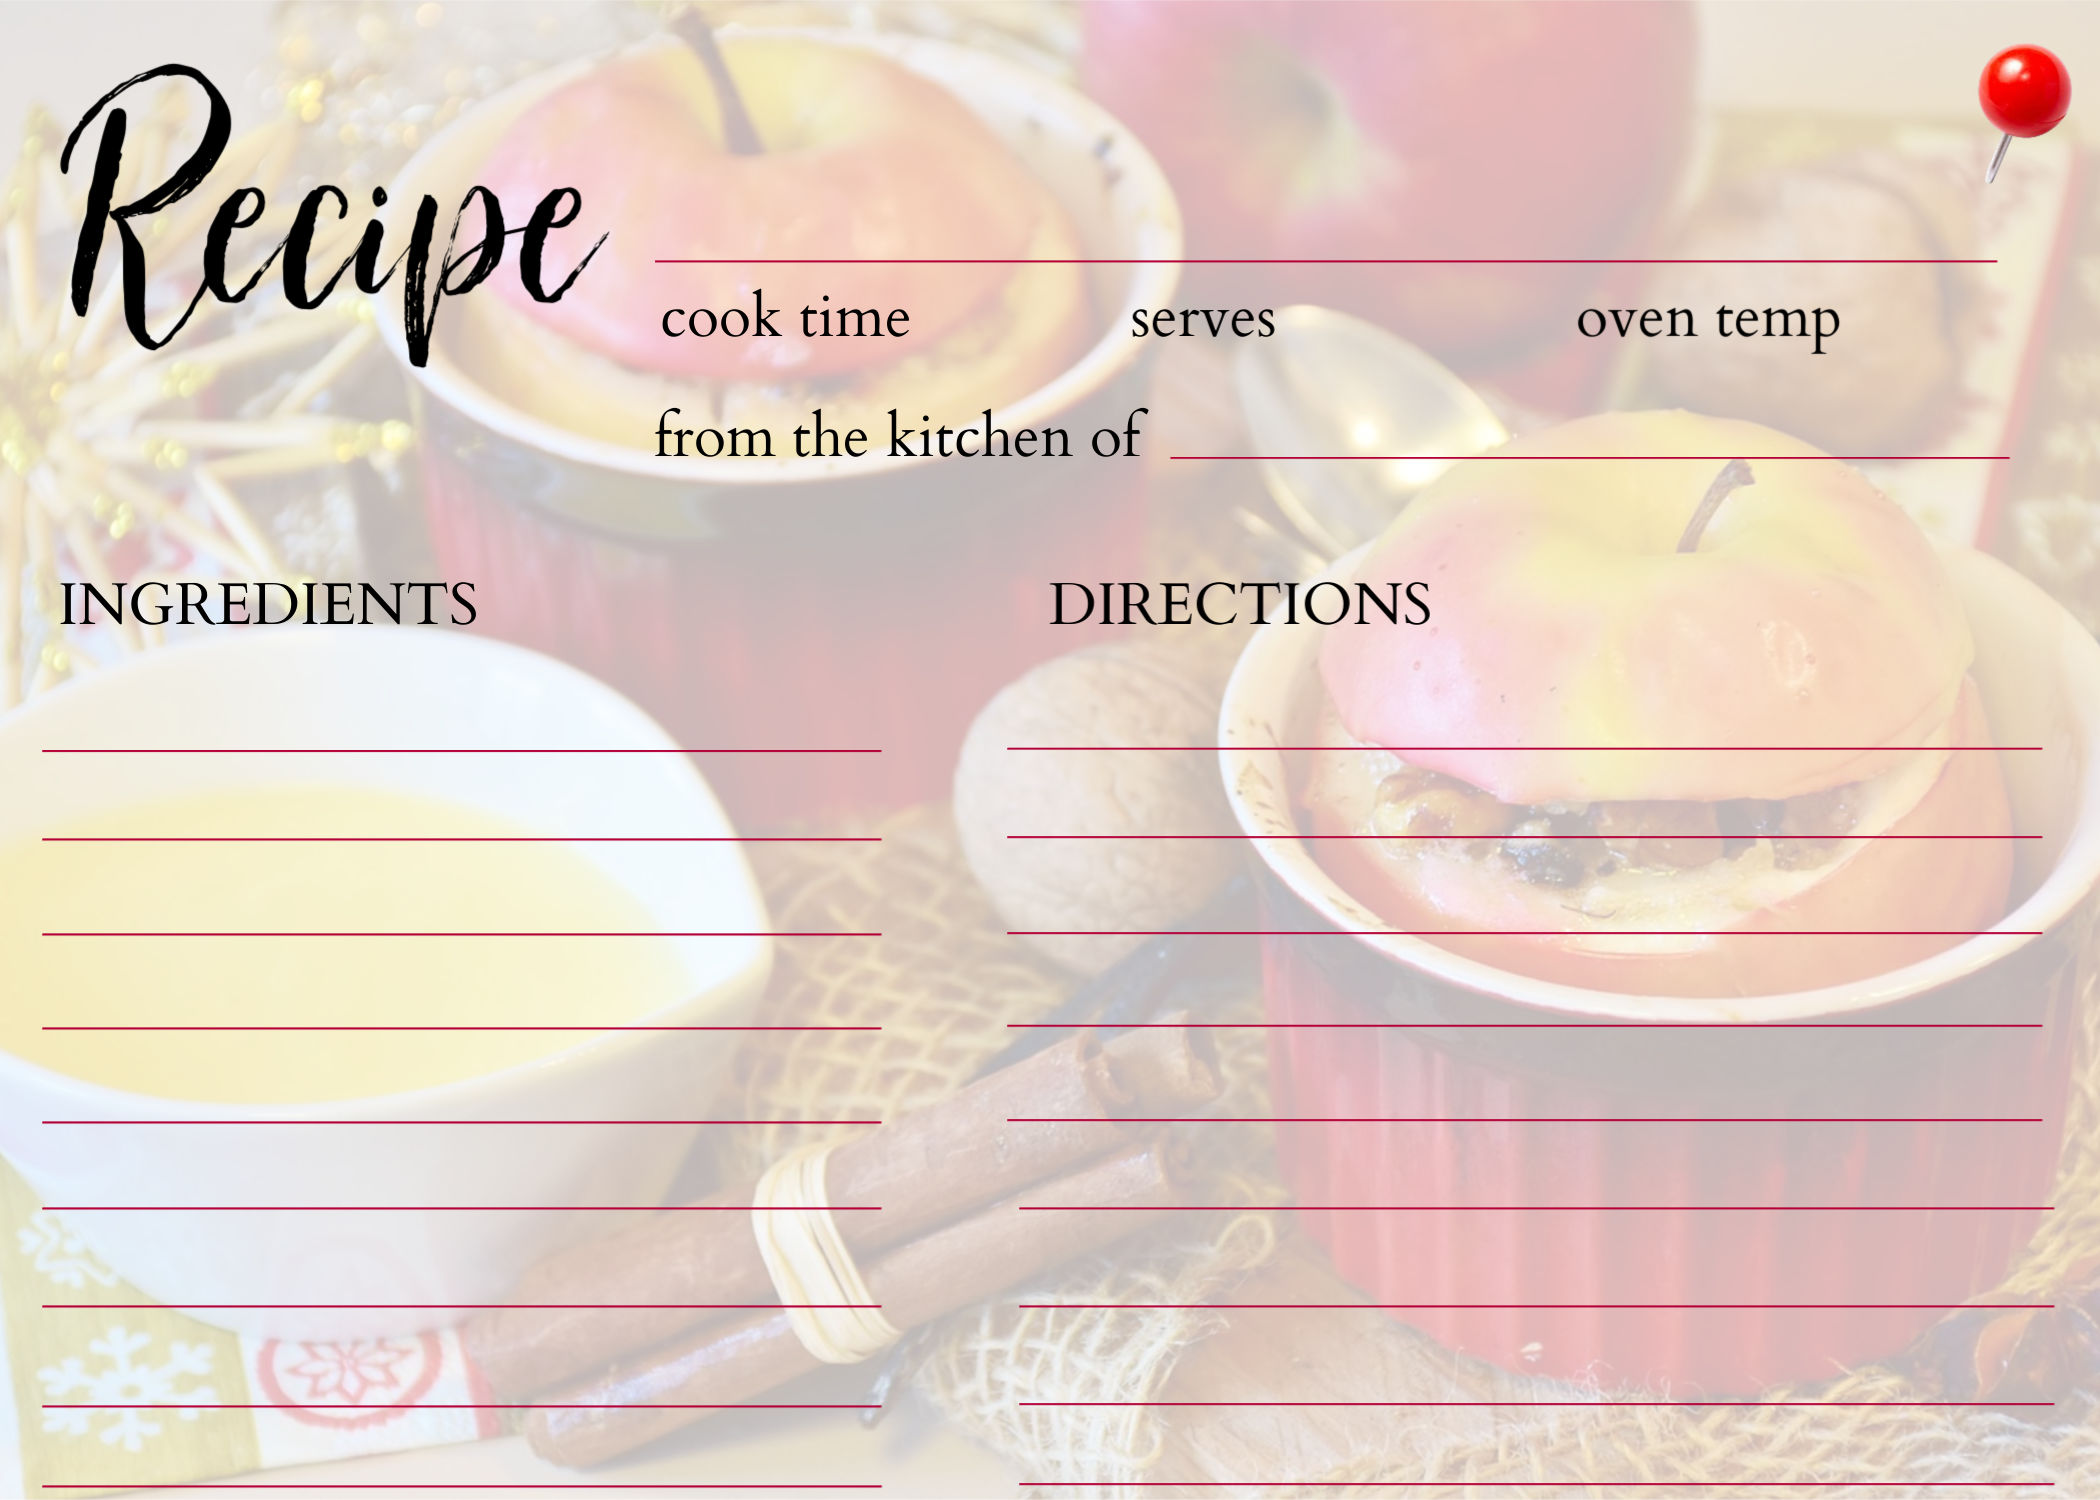 Colorful and simple recipe card for your Thanksgiving dinner. Gift it with your recipe or print out on carton stock for personal use.